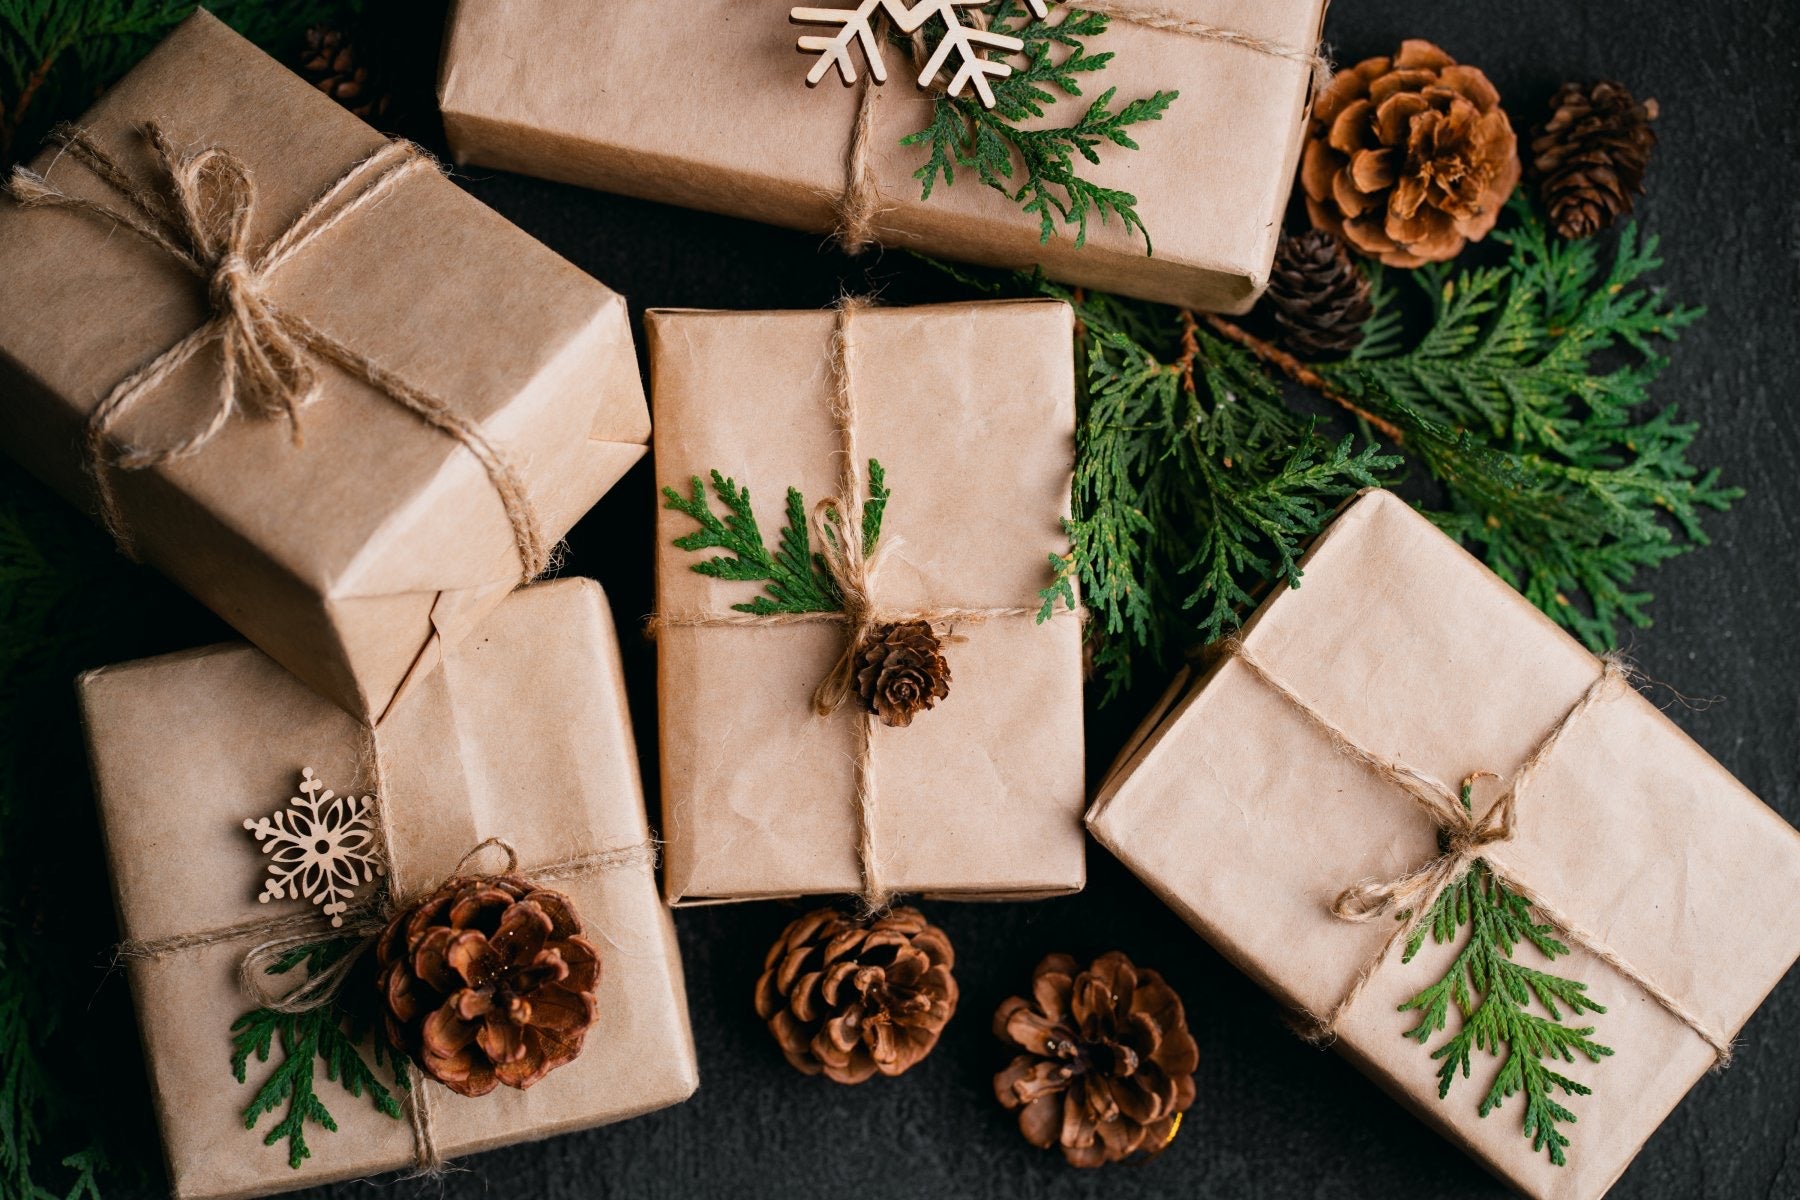 Top 6 Sustainable Gifts for the Holidays 2020